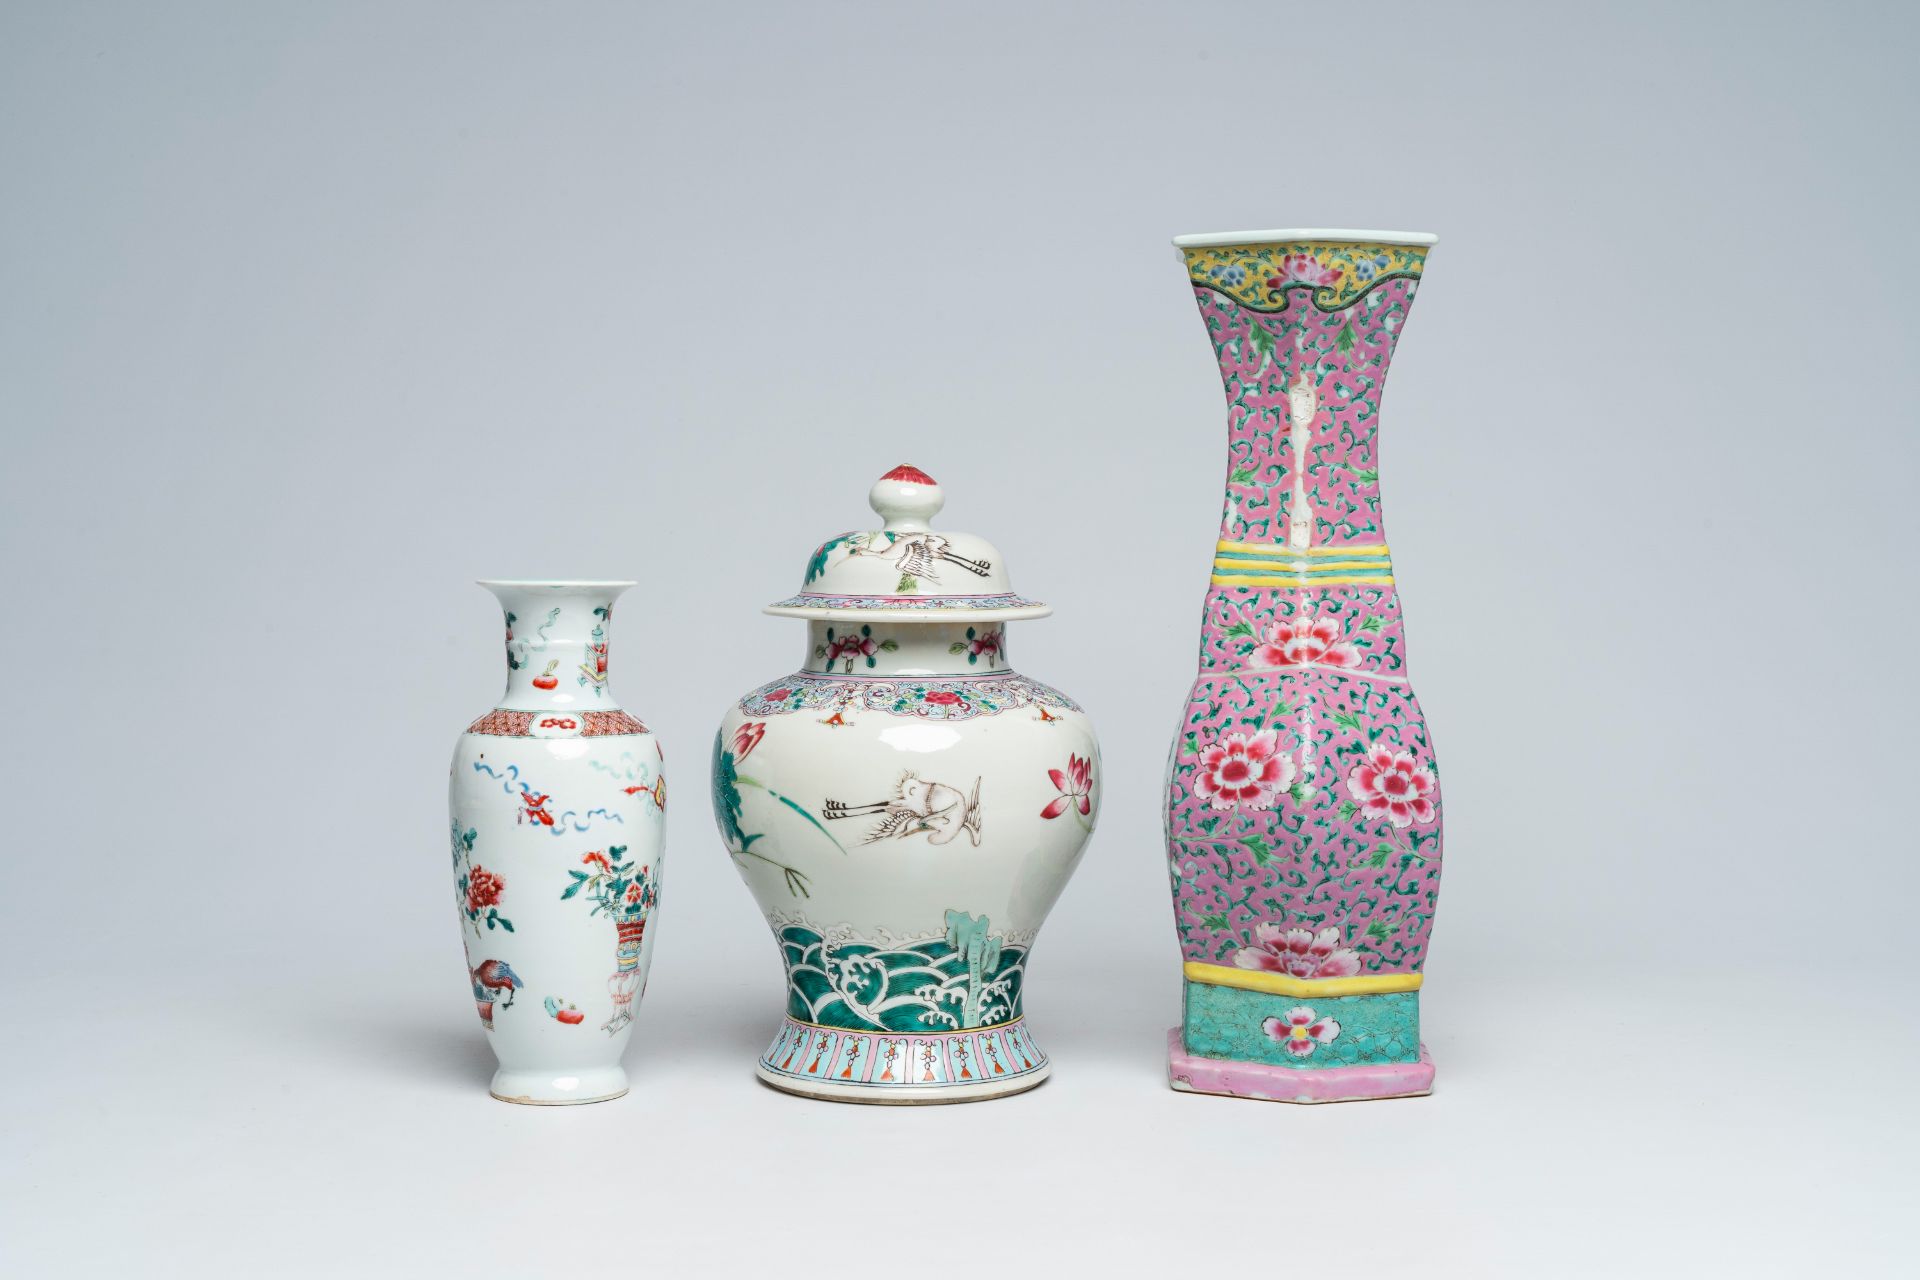 Three Chinese famille rose vases with floral design, 19th C. - Image 3 of 7